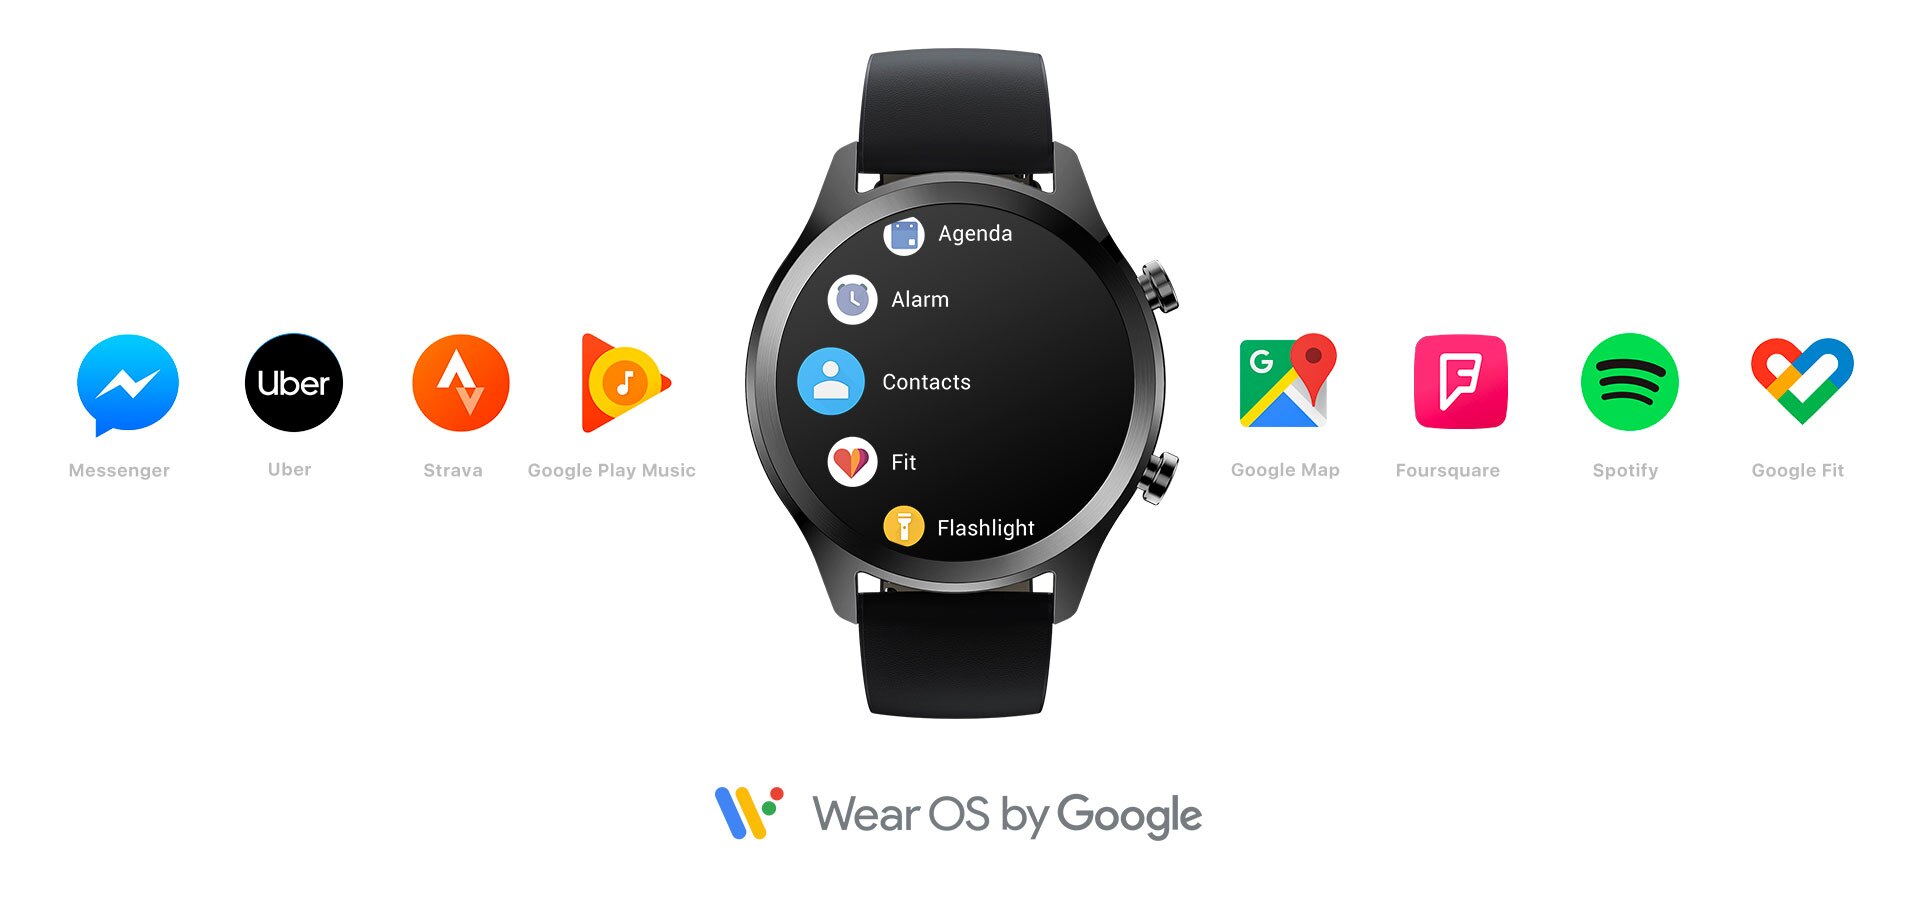 Ticwatch C2 Wear OS by Google Smartwatch Women's Watch Android&iOS Compatible IP68 Swim ready Waterproof Watch GPS NFC Available